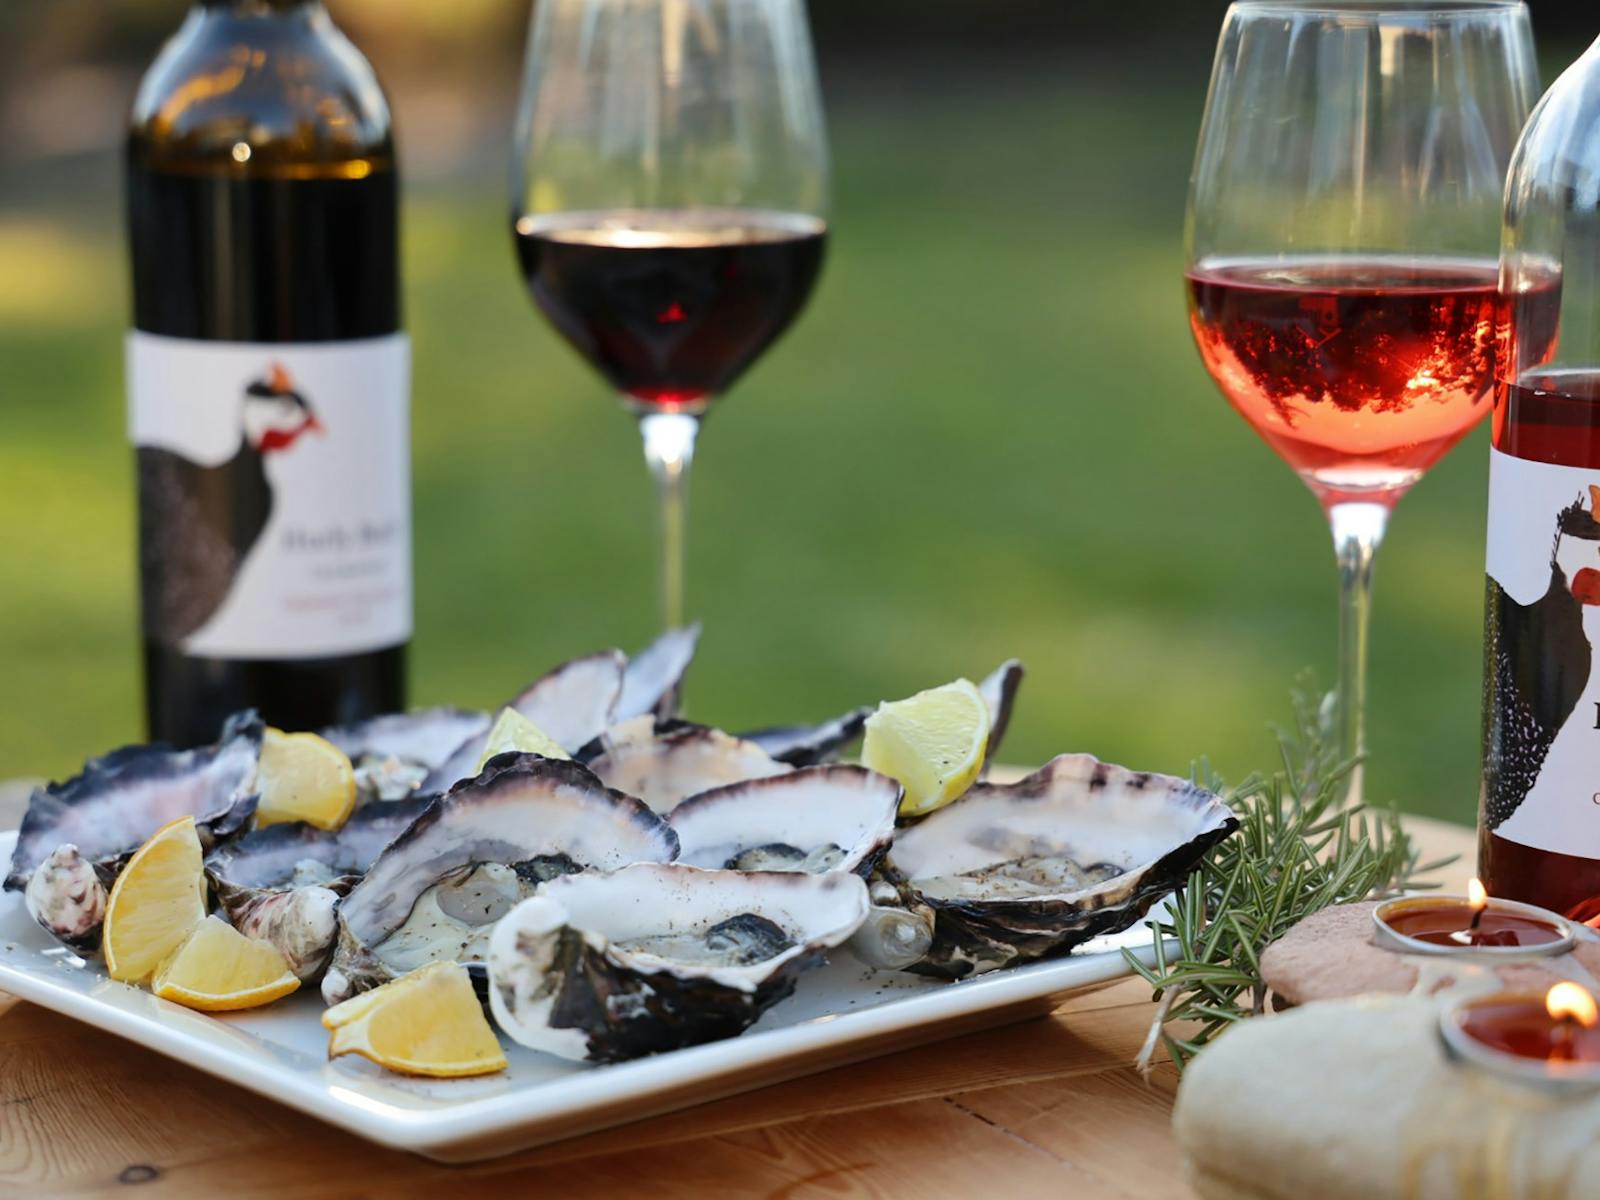 Hurly Burly Wine matched beautifully with Tasmania's east coast oysters